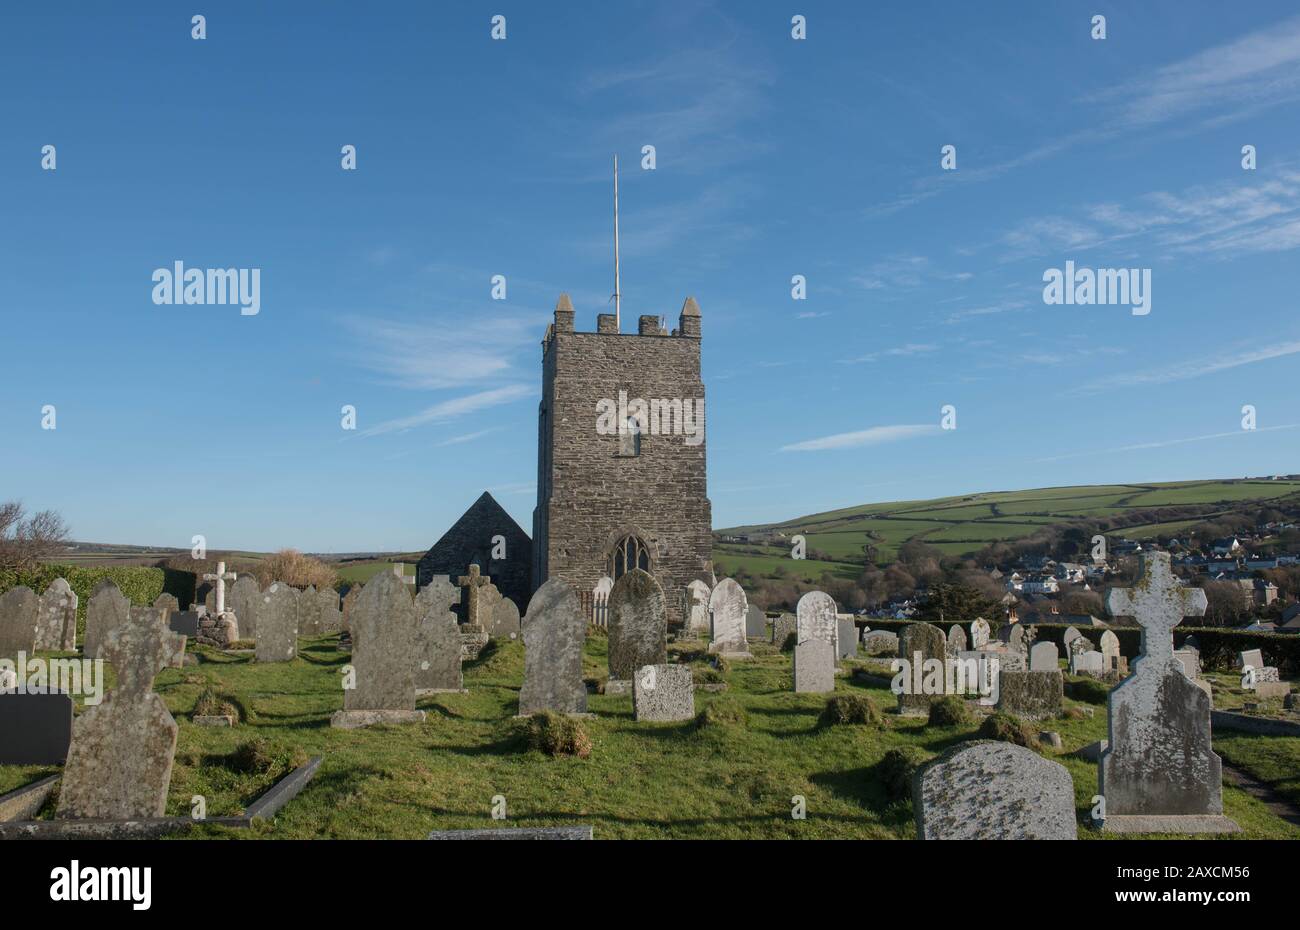 St Symphorian Church in the Coastal Village of Forrabury with a Bright Blue Sky Background in Rural Cornwall, England, UK Stock Photo